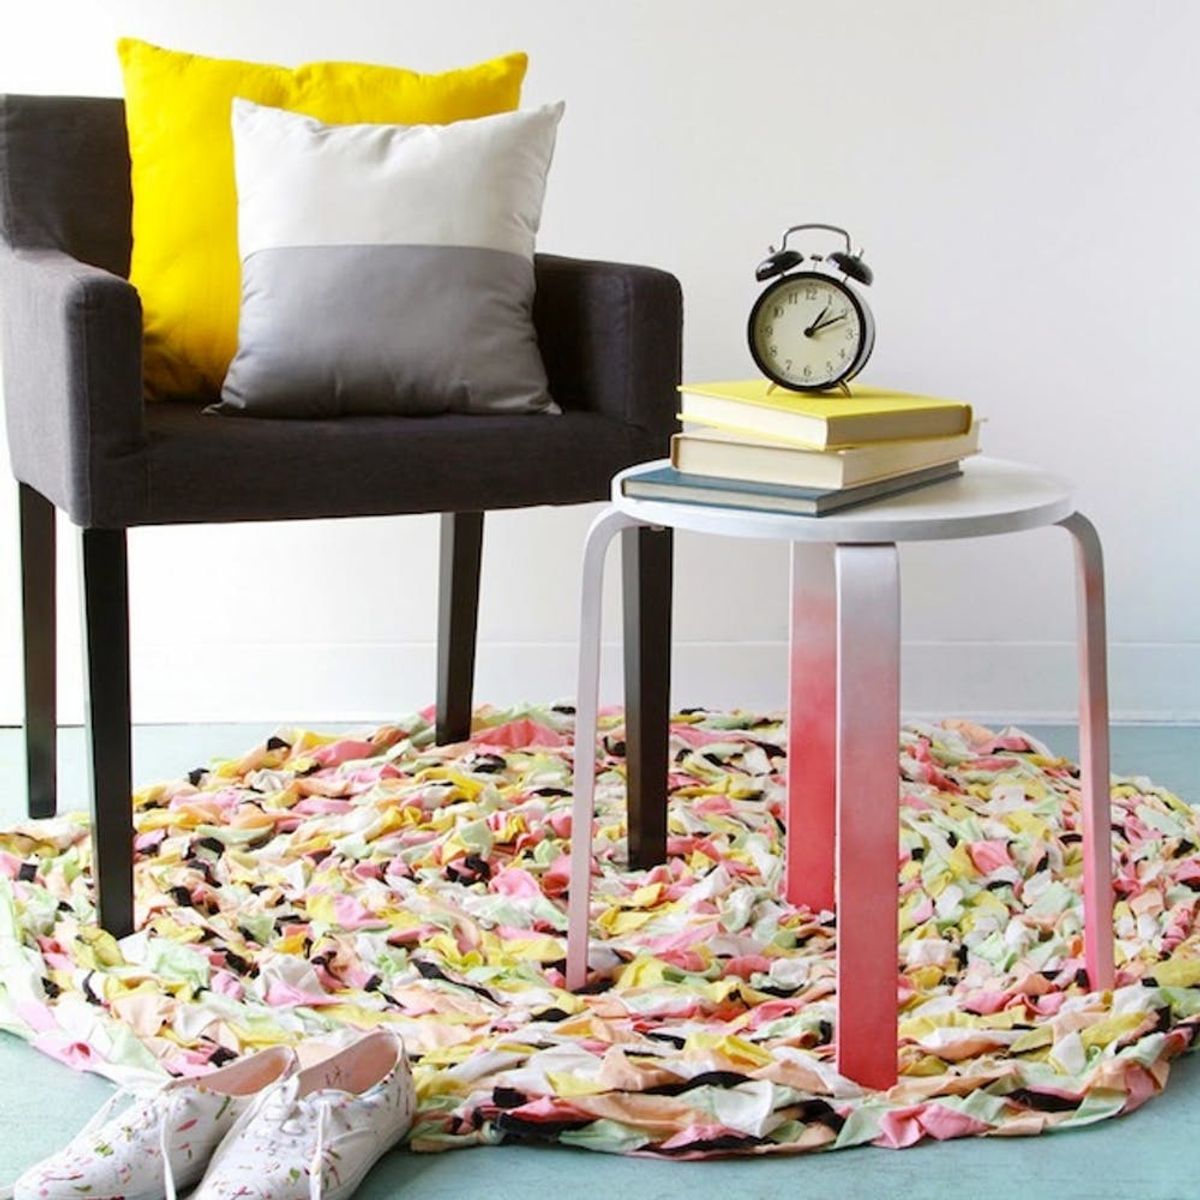 Make Over Your Home With These 23 DIY Rugs